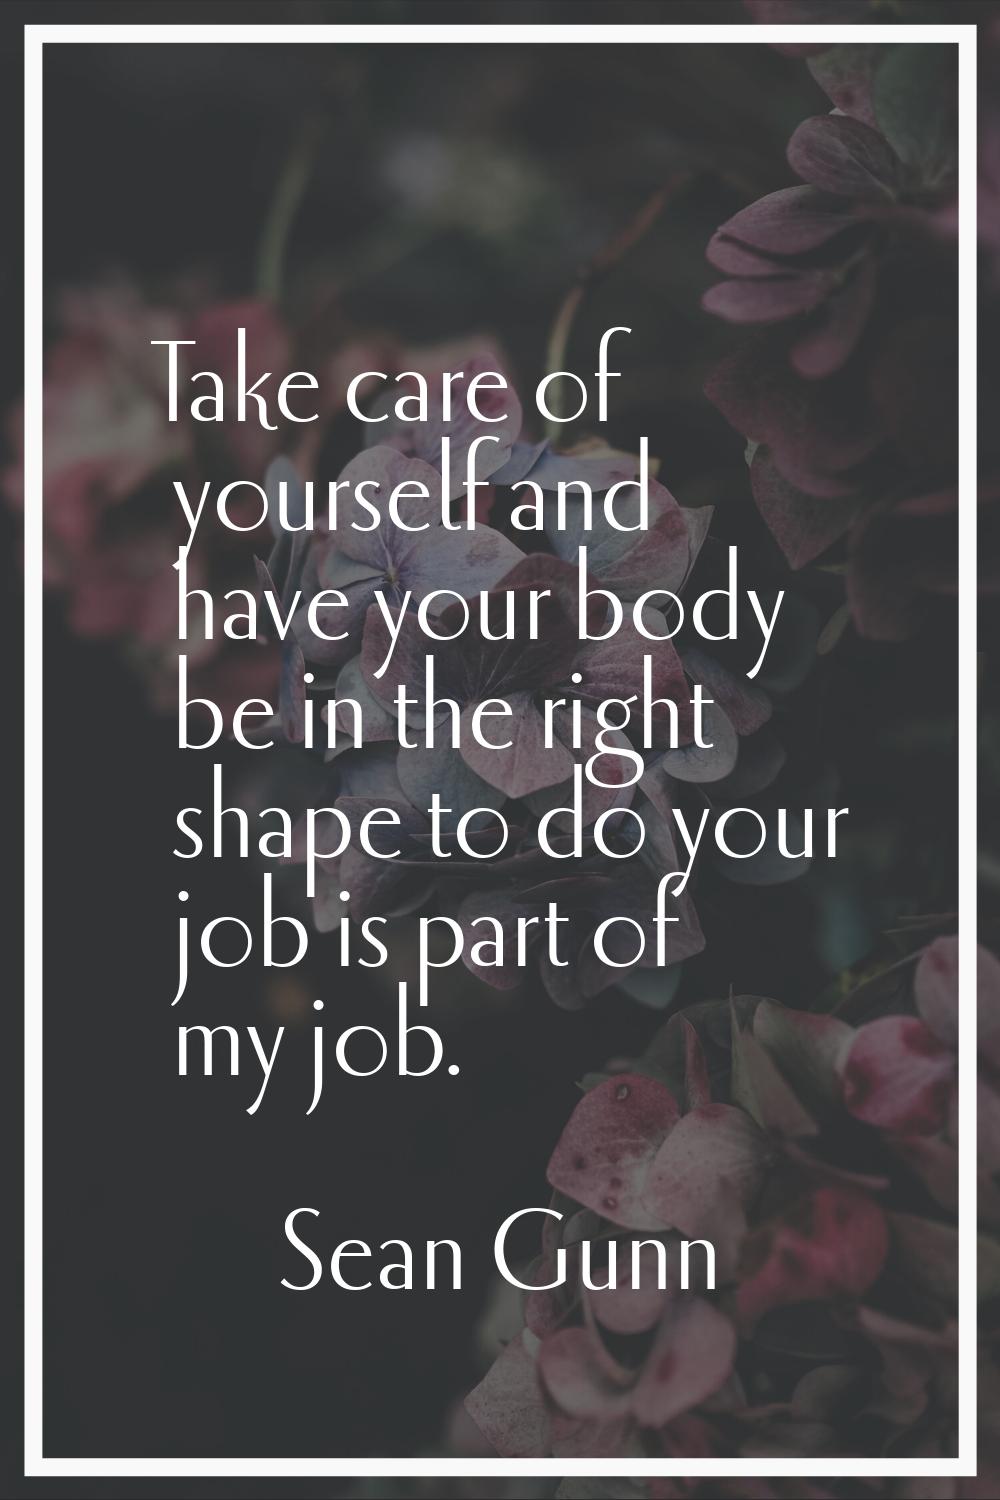 Take care of yourself and have your body be in the right shape to do your job is part of my job.